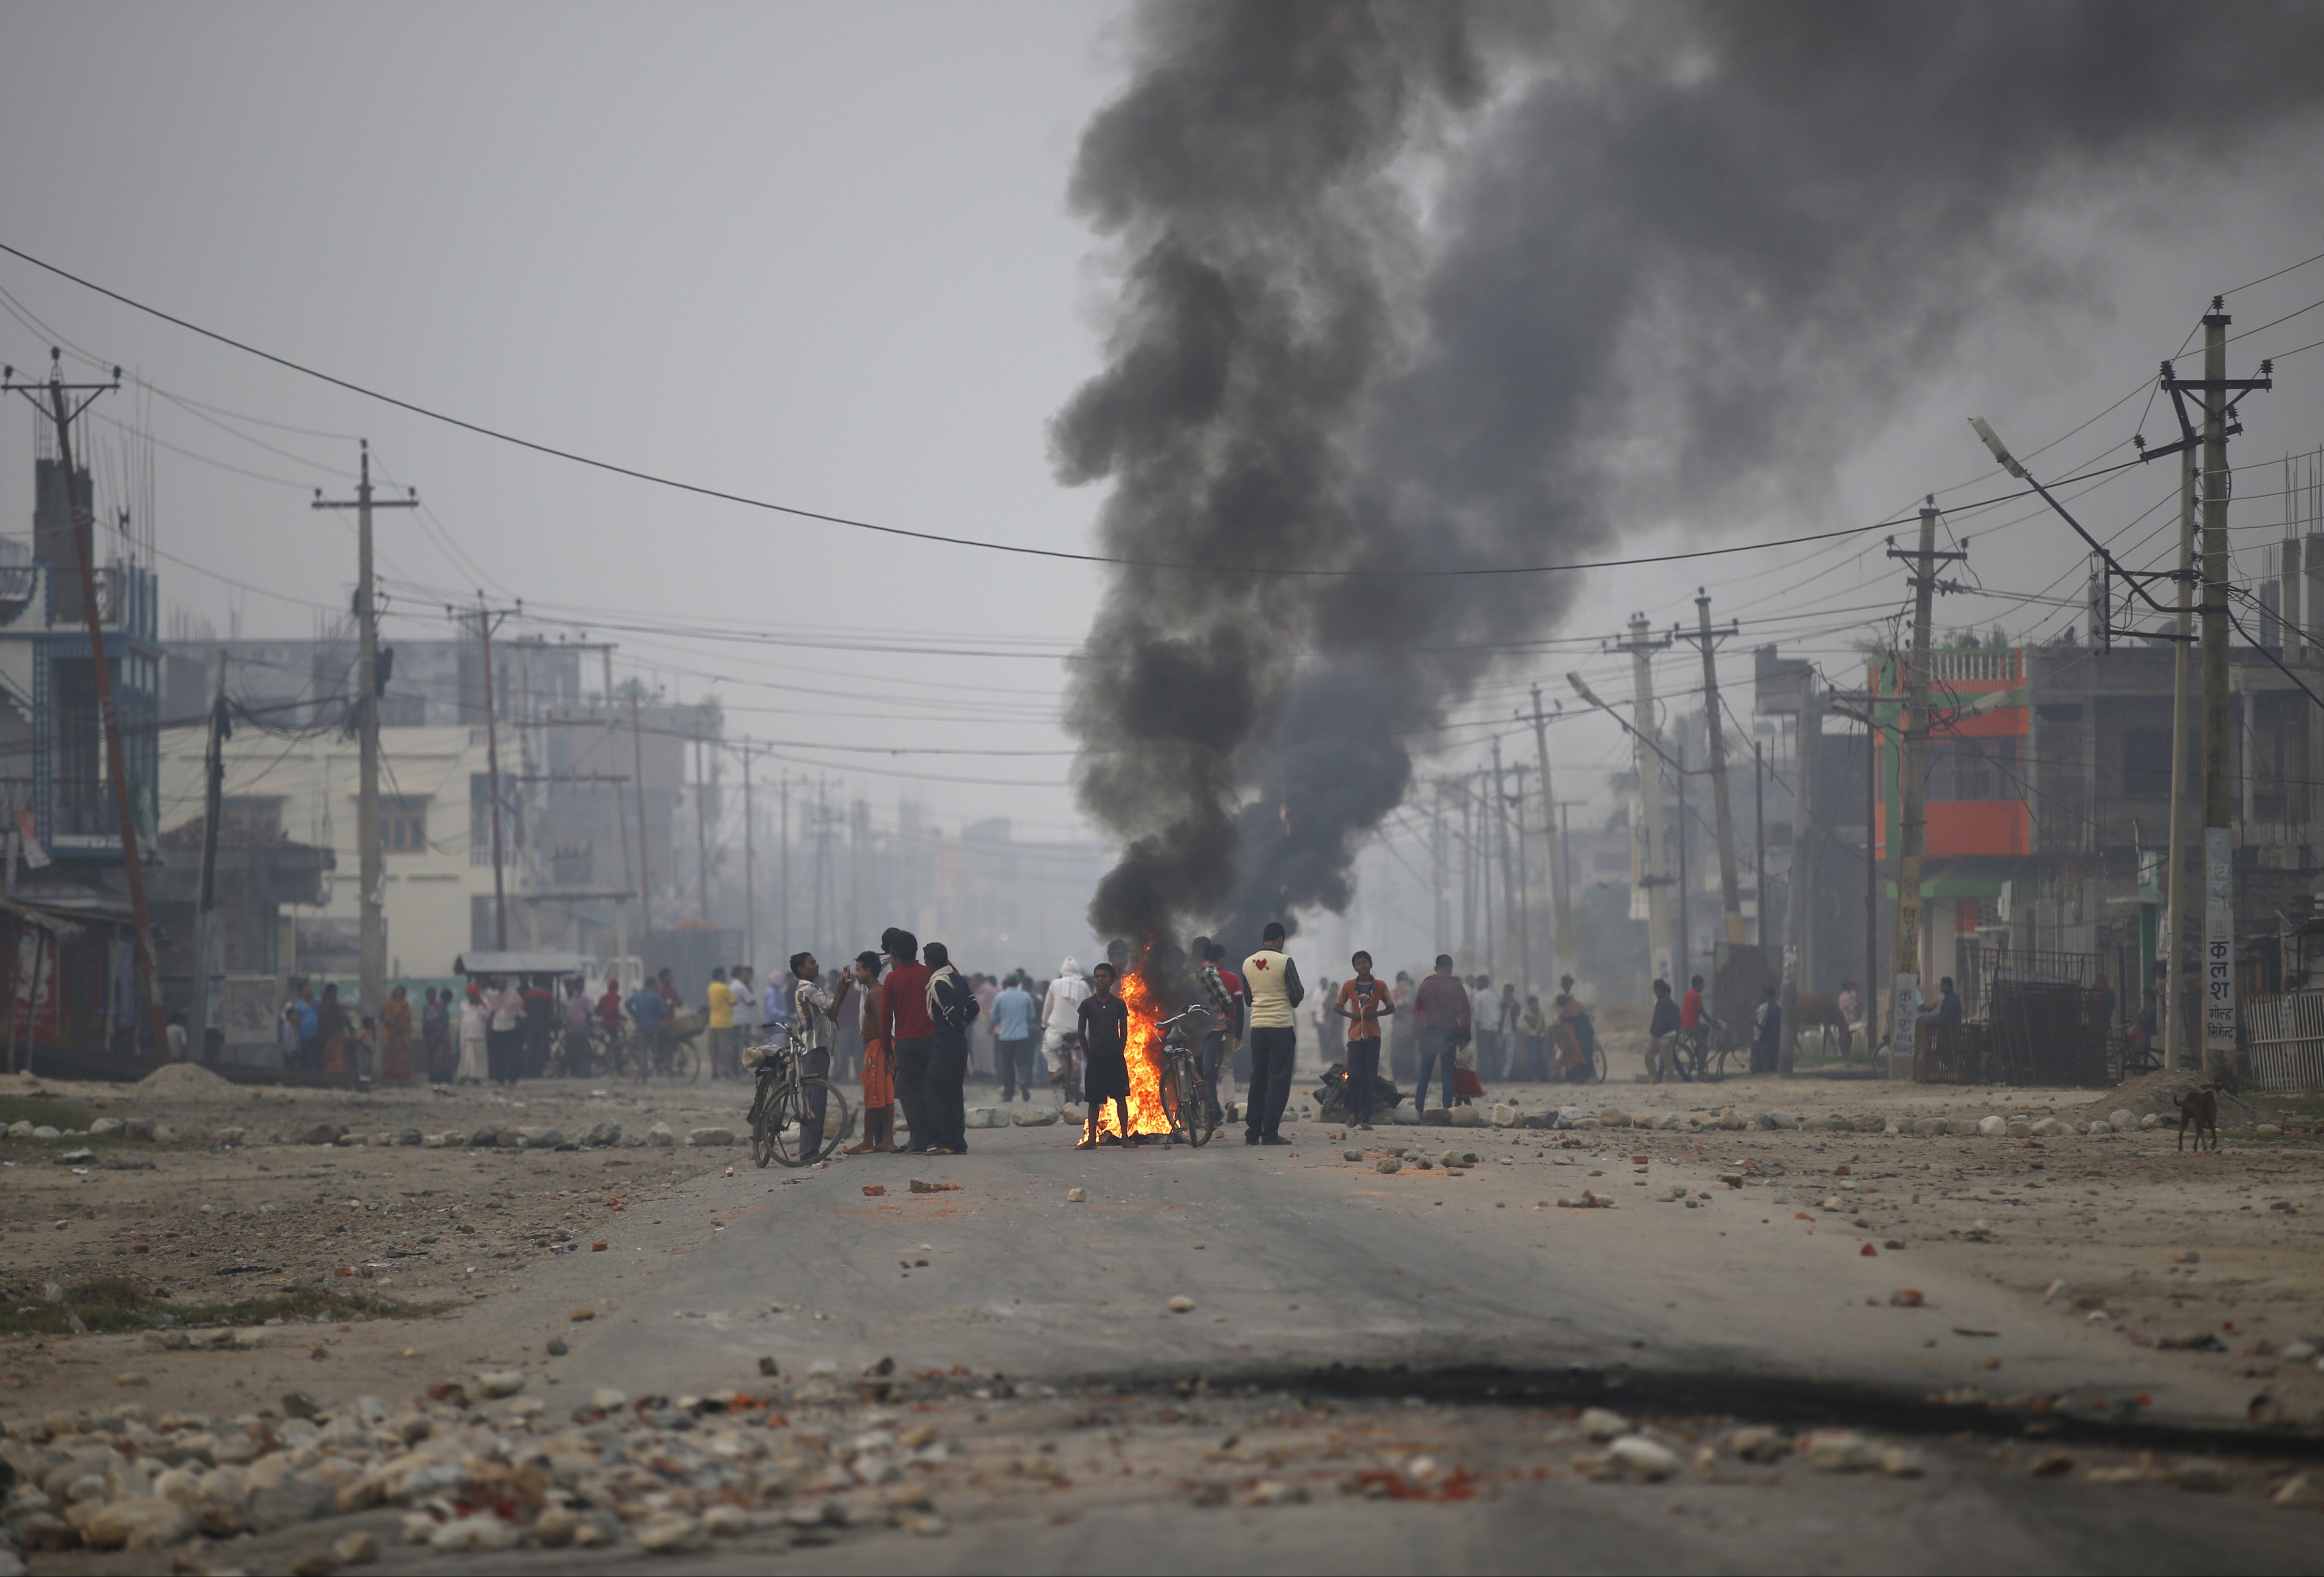 Protesters stand near burning tires as they gather to block the highway connecting Nepal and India, during a general strike called by Madhesi protesters demonstrating against the new constitution in Birgunj, Nepal, on Nov. 5, 2015 (Navesh Chitrakar—Reuters)